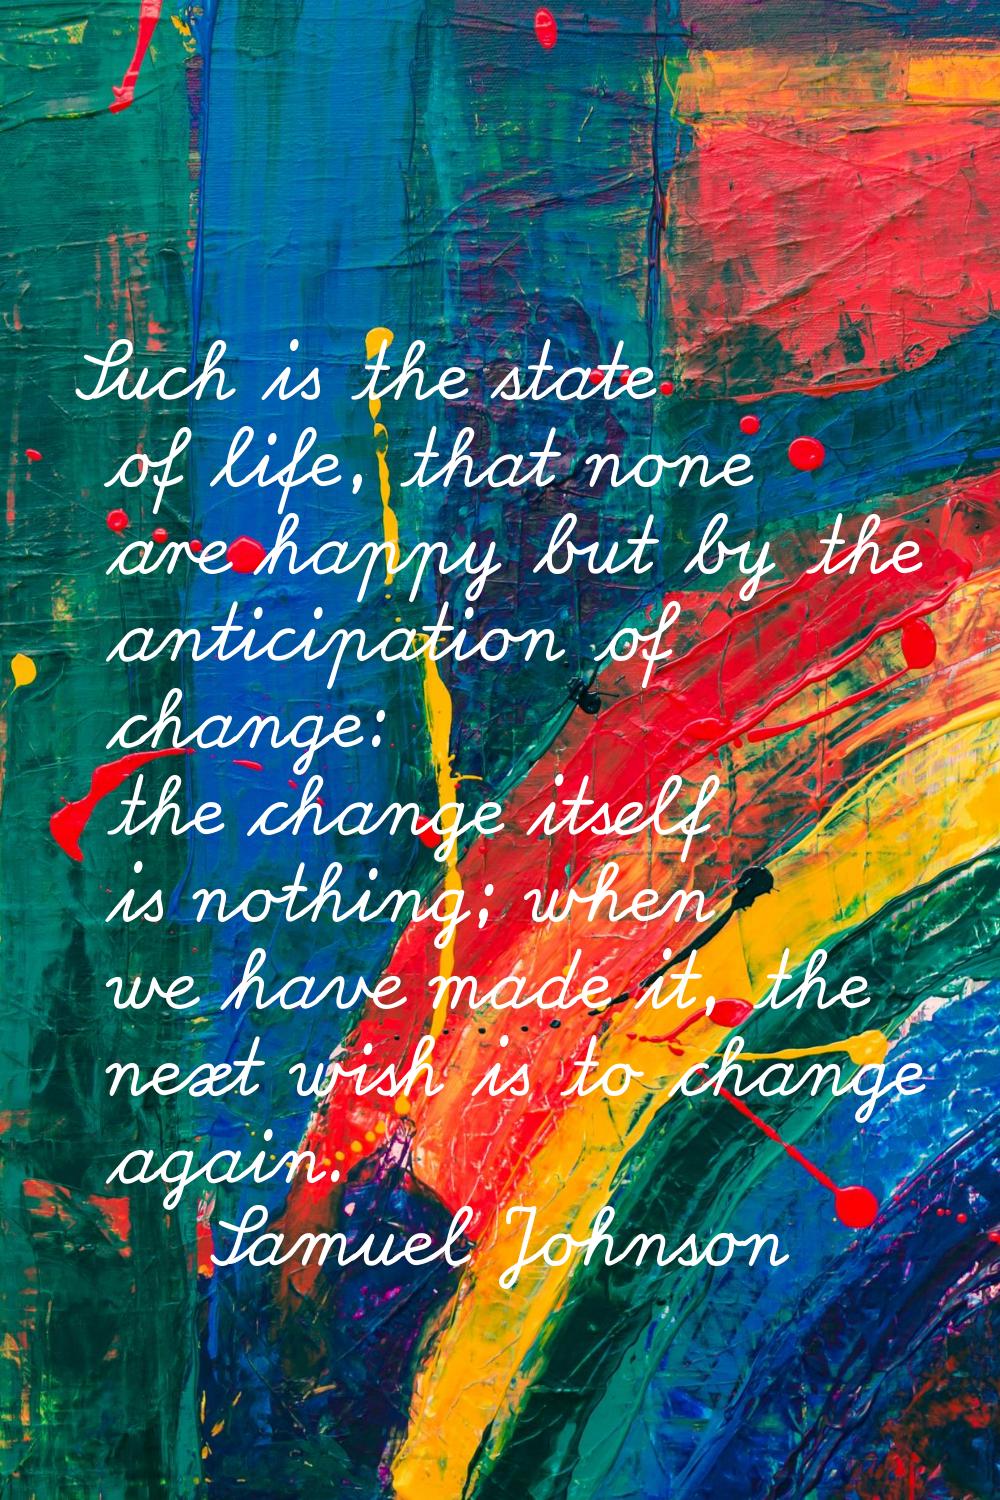 Such is the state of life, that none are happy but by the anticipation of change: the change itself